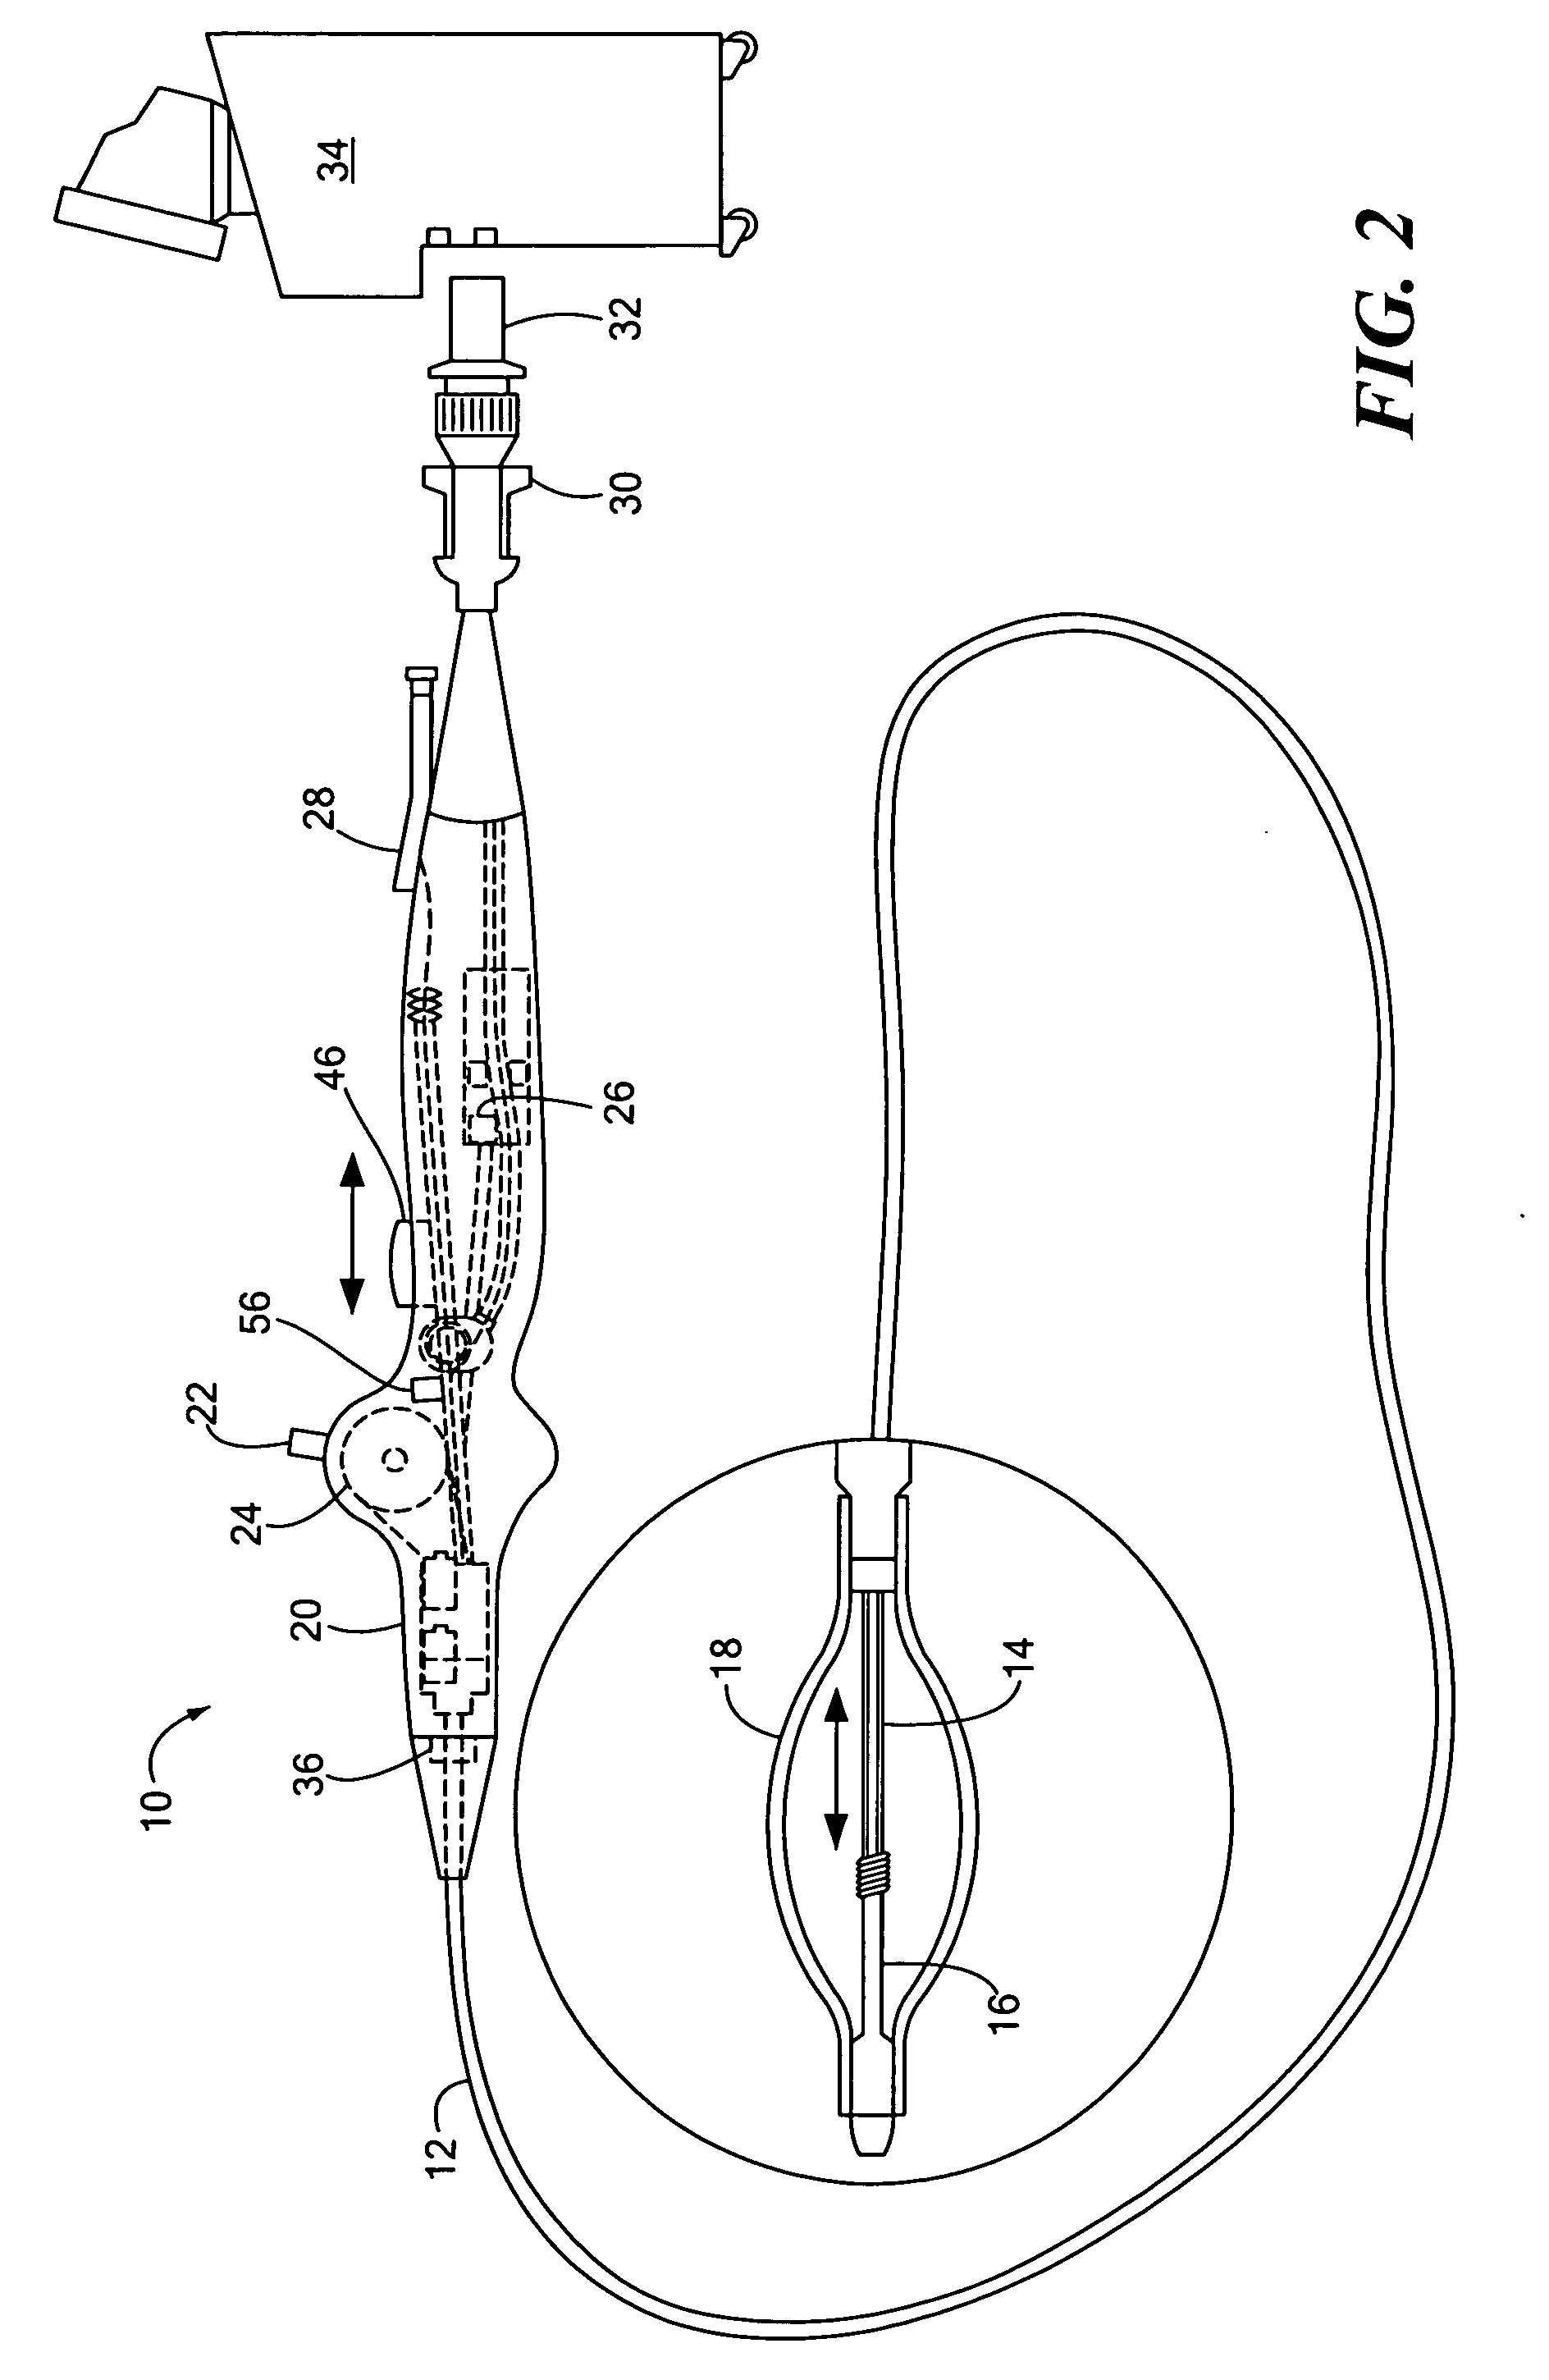 Shape modification system for a cooling chamber of a medical device